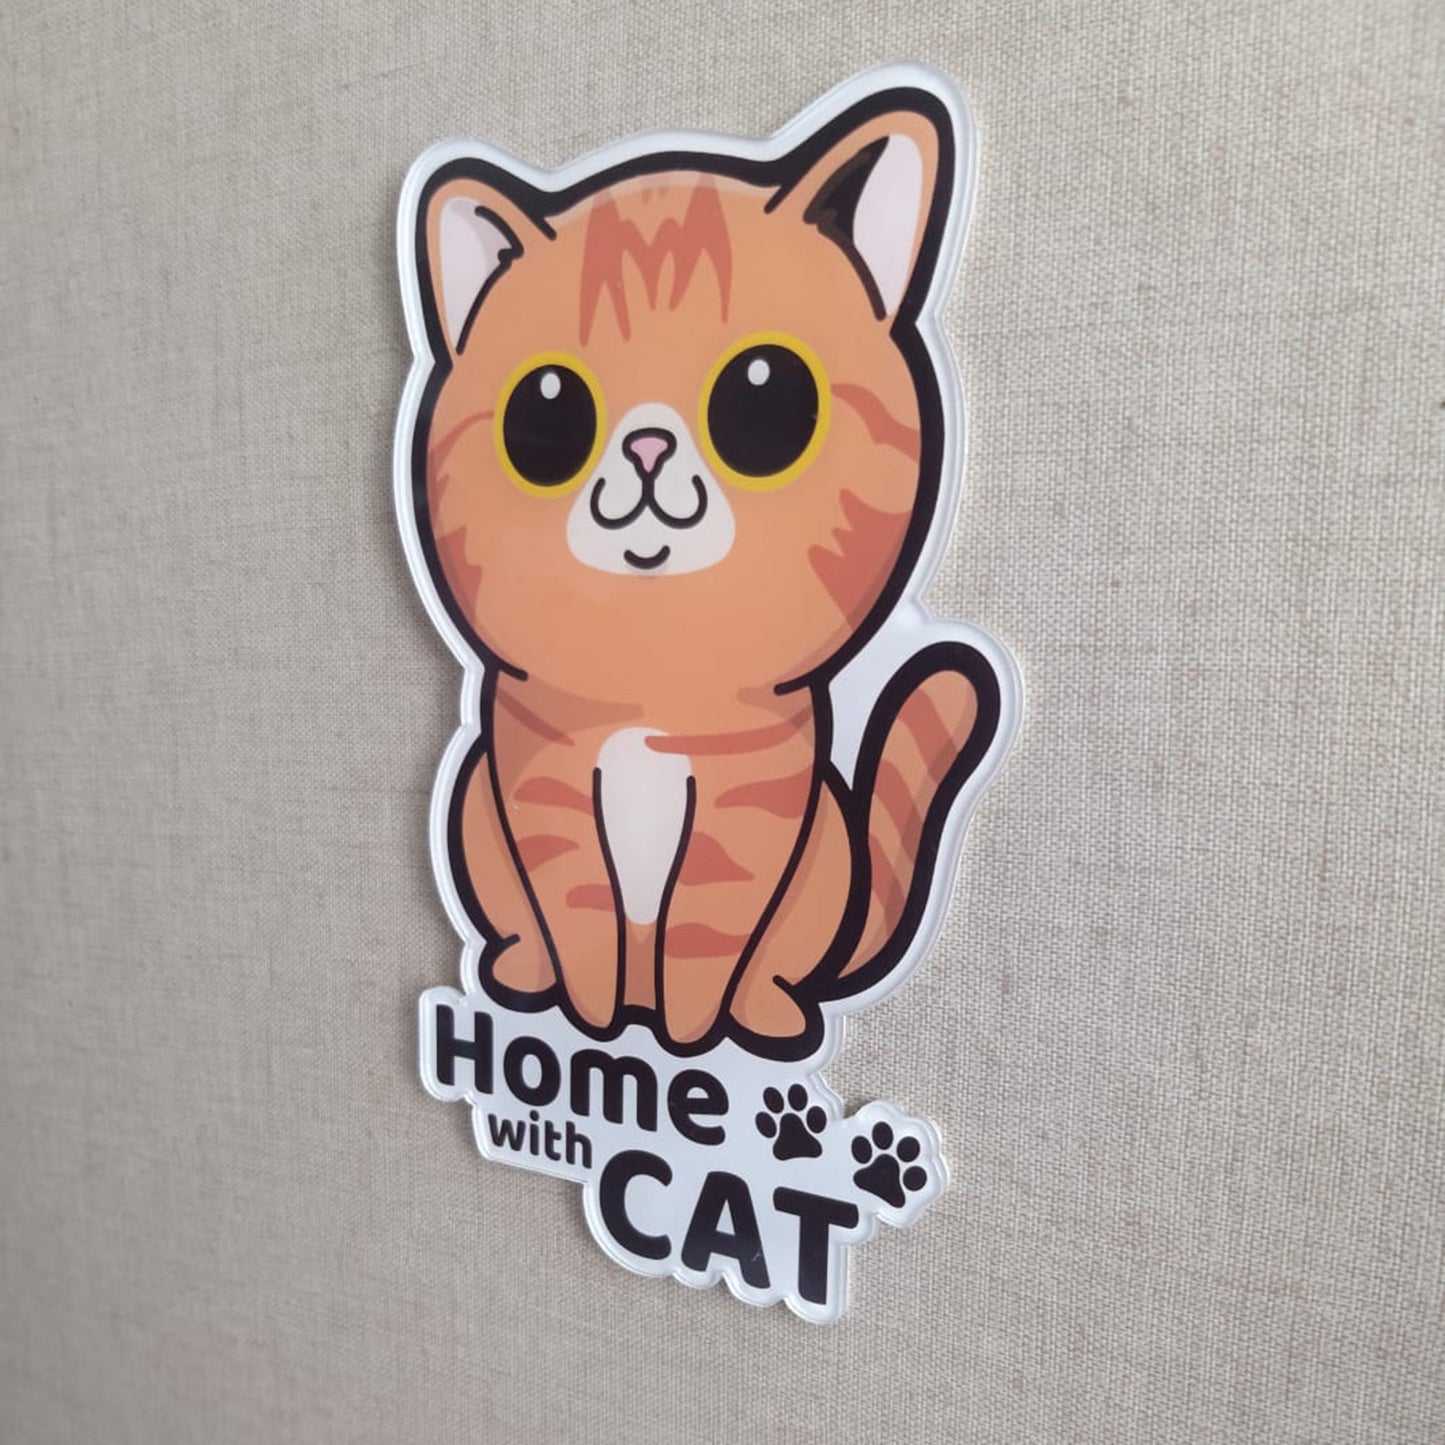 Mochi & friends 貓貓門牌 Home with cat adhesive sign